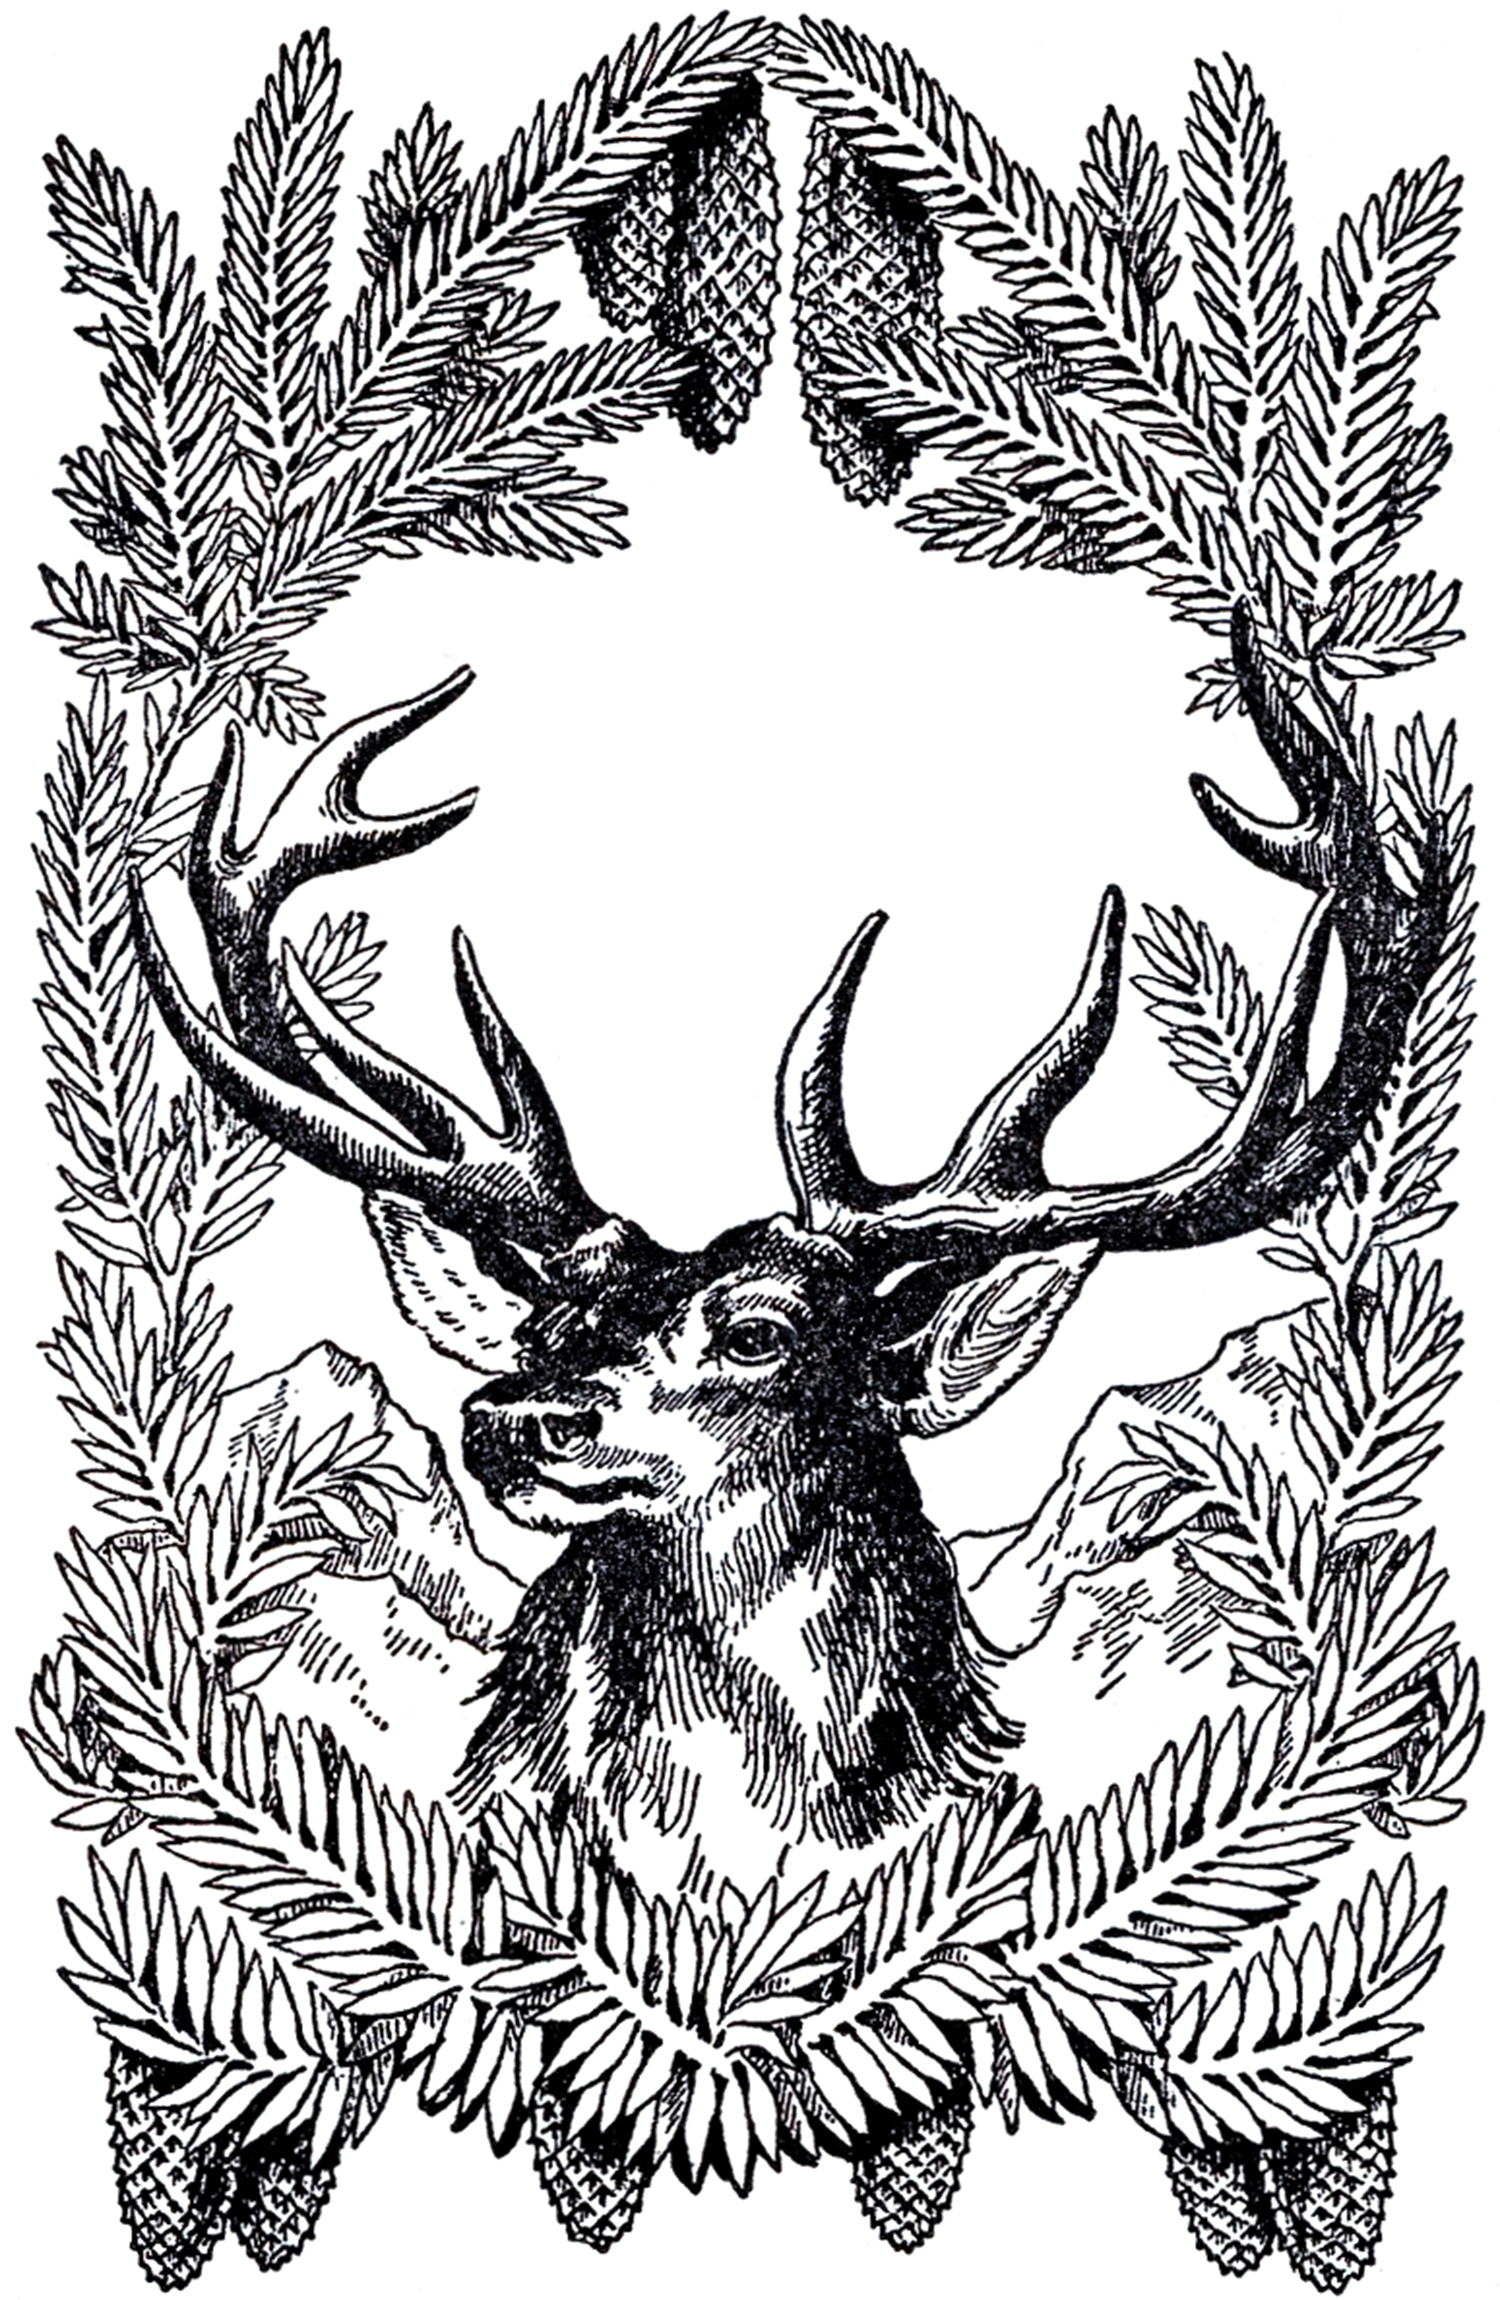 Vintage-Christmas-Deer-Image-GraphicsFairy - The Graphics Fairy